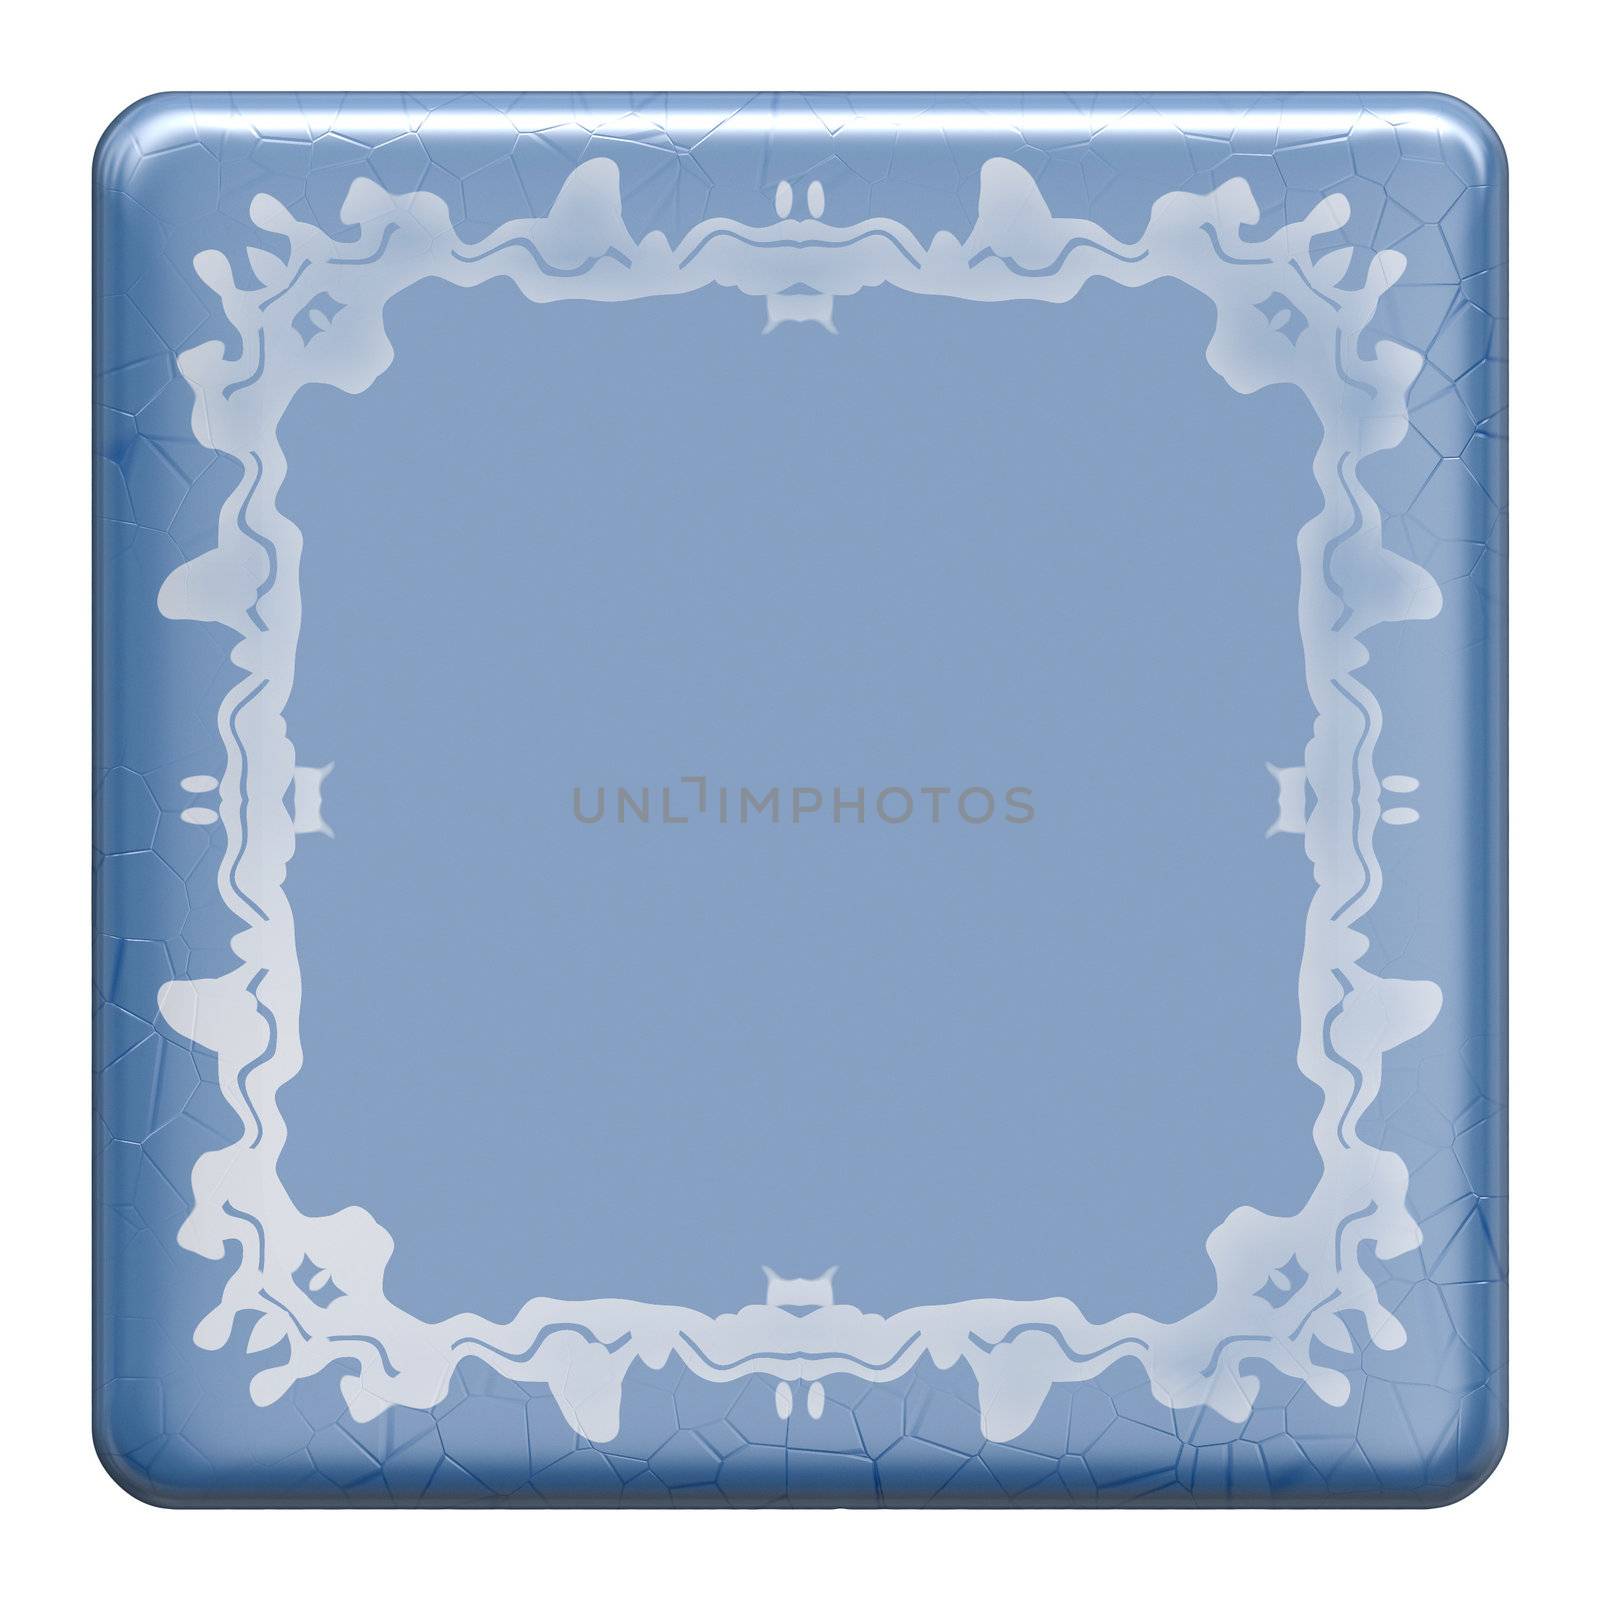 An image of a nice delft tile